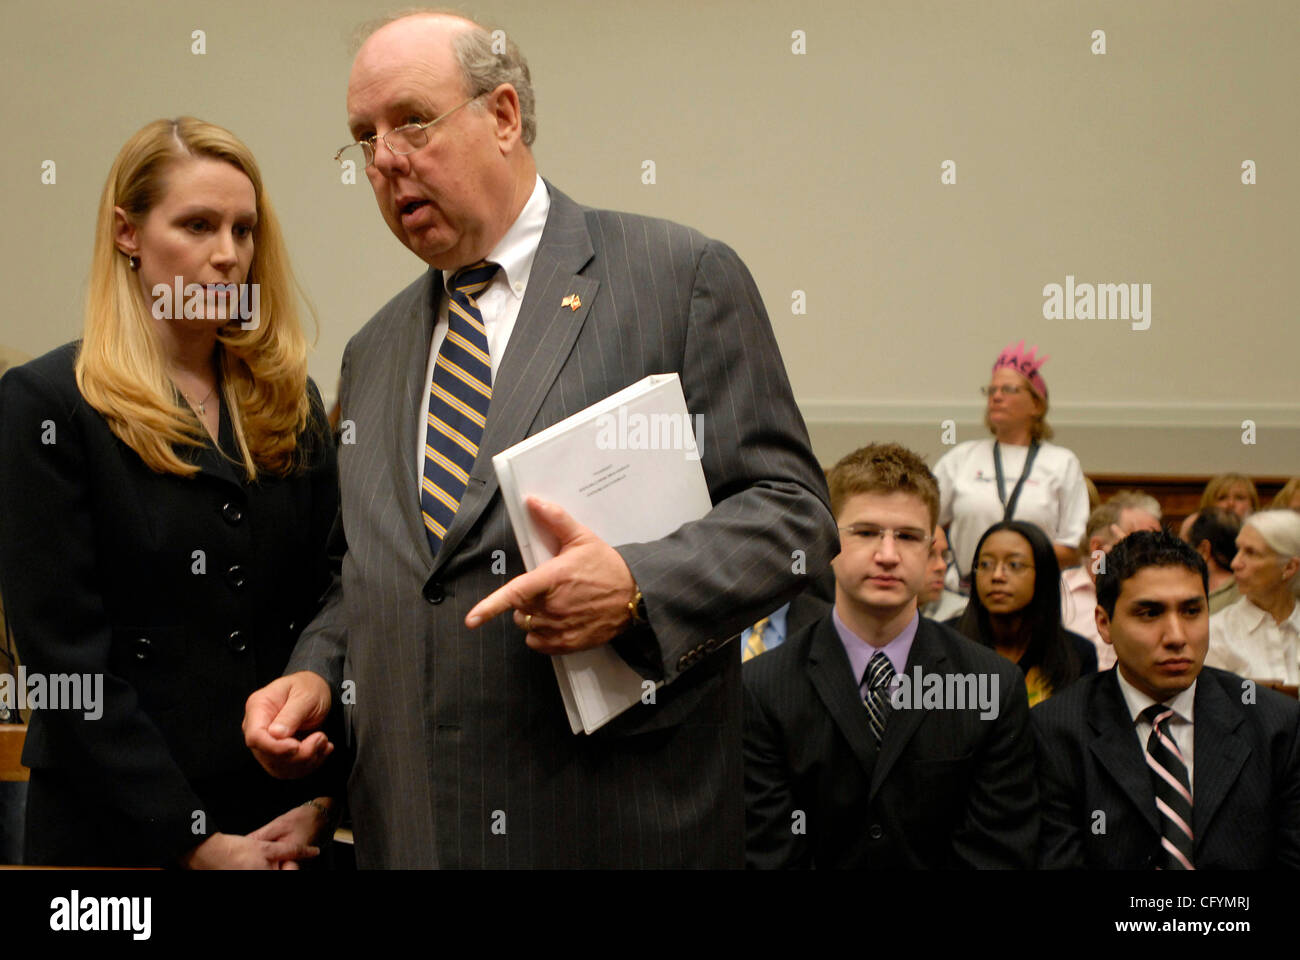 May 23, 2007 - Washington, DC, USA - Former Justice Department liaison to the White House, MONICA GOODLING, meets with her lawyer, JOHN DOWD prior to testifying before the House Judiciary committee about her role in the firing of US attorneys in late 2006 and early 2007. Goodling denied taken a majo Stock Photo